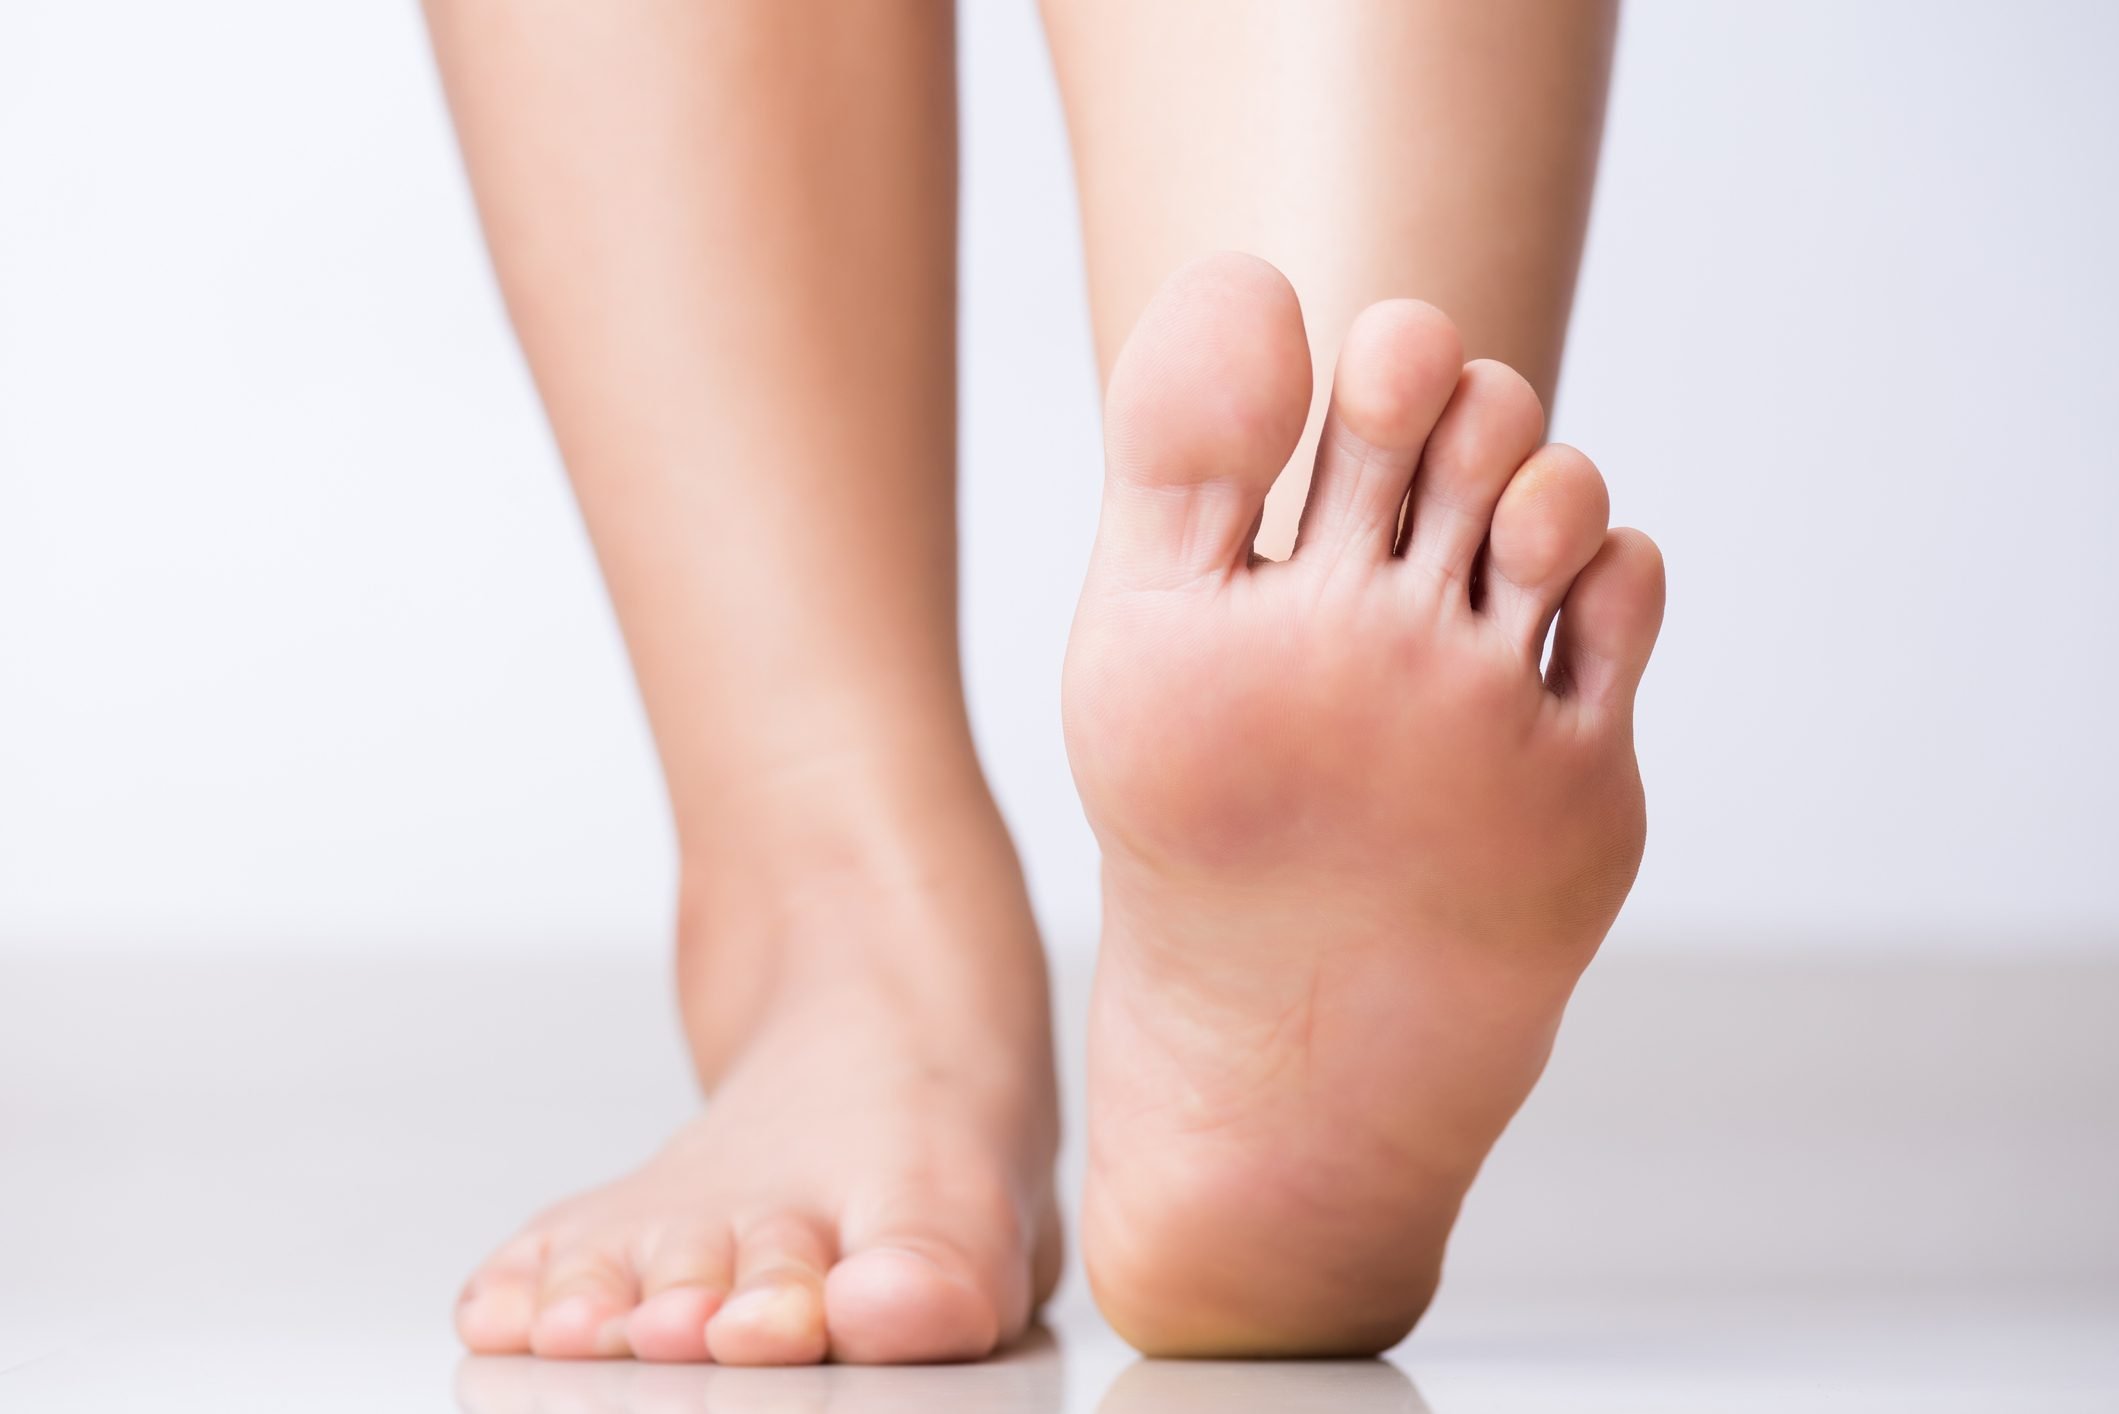 Foot Care Advice for People With Diabetes